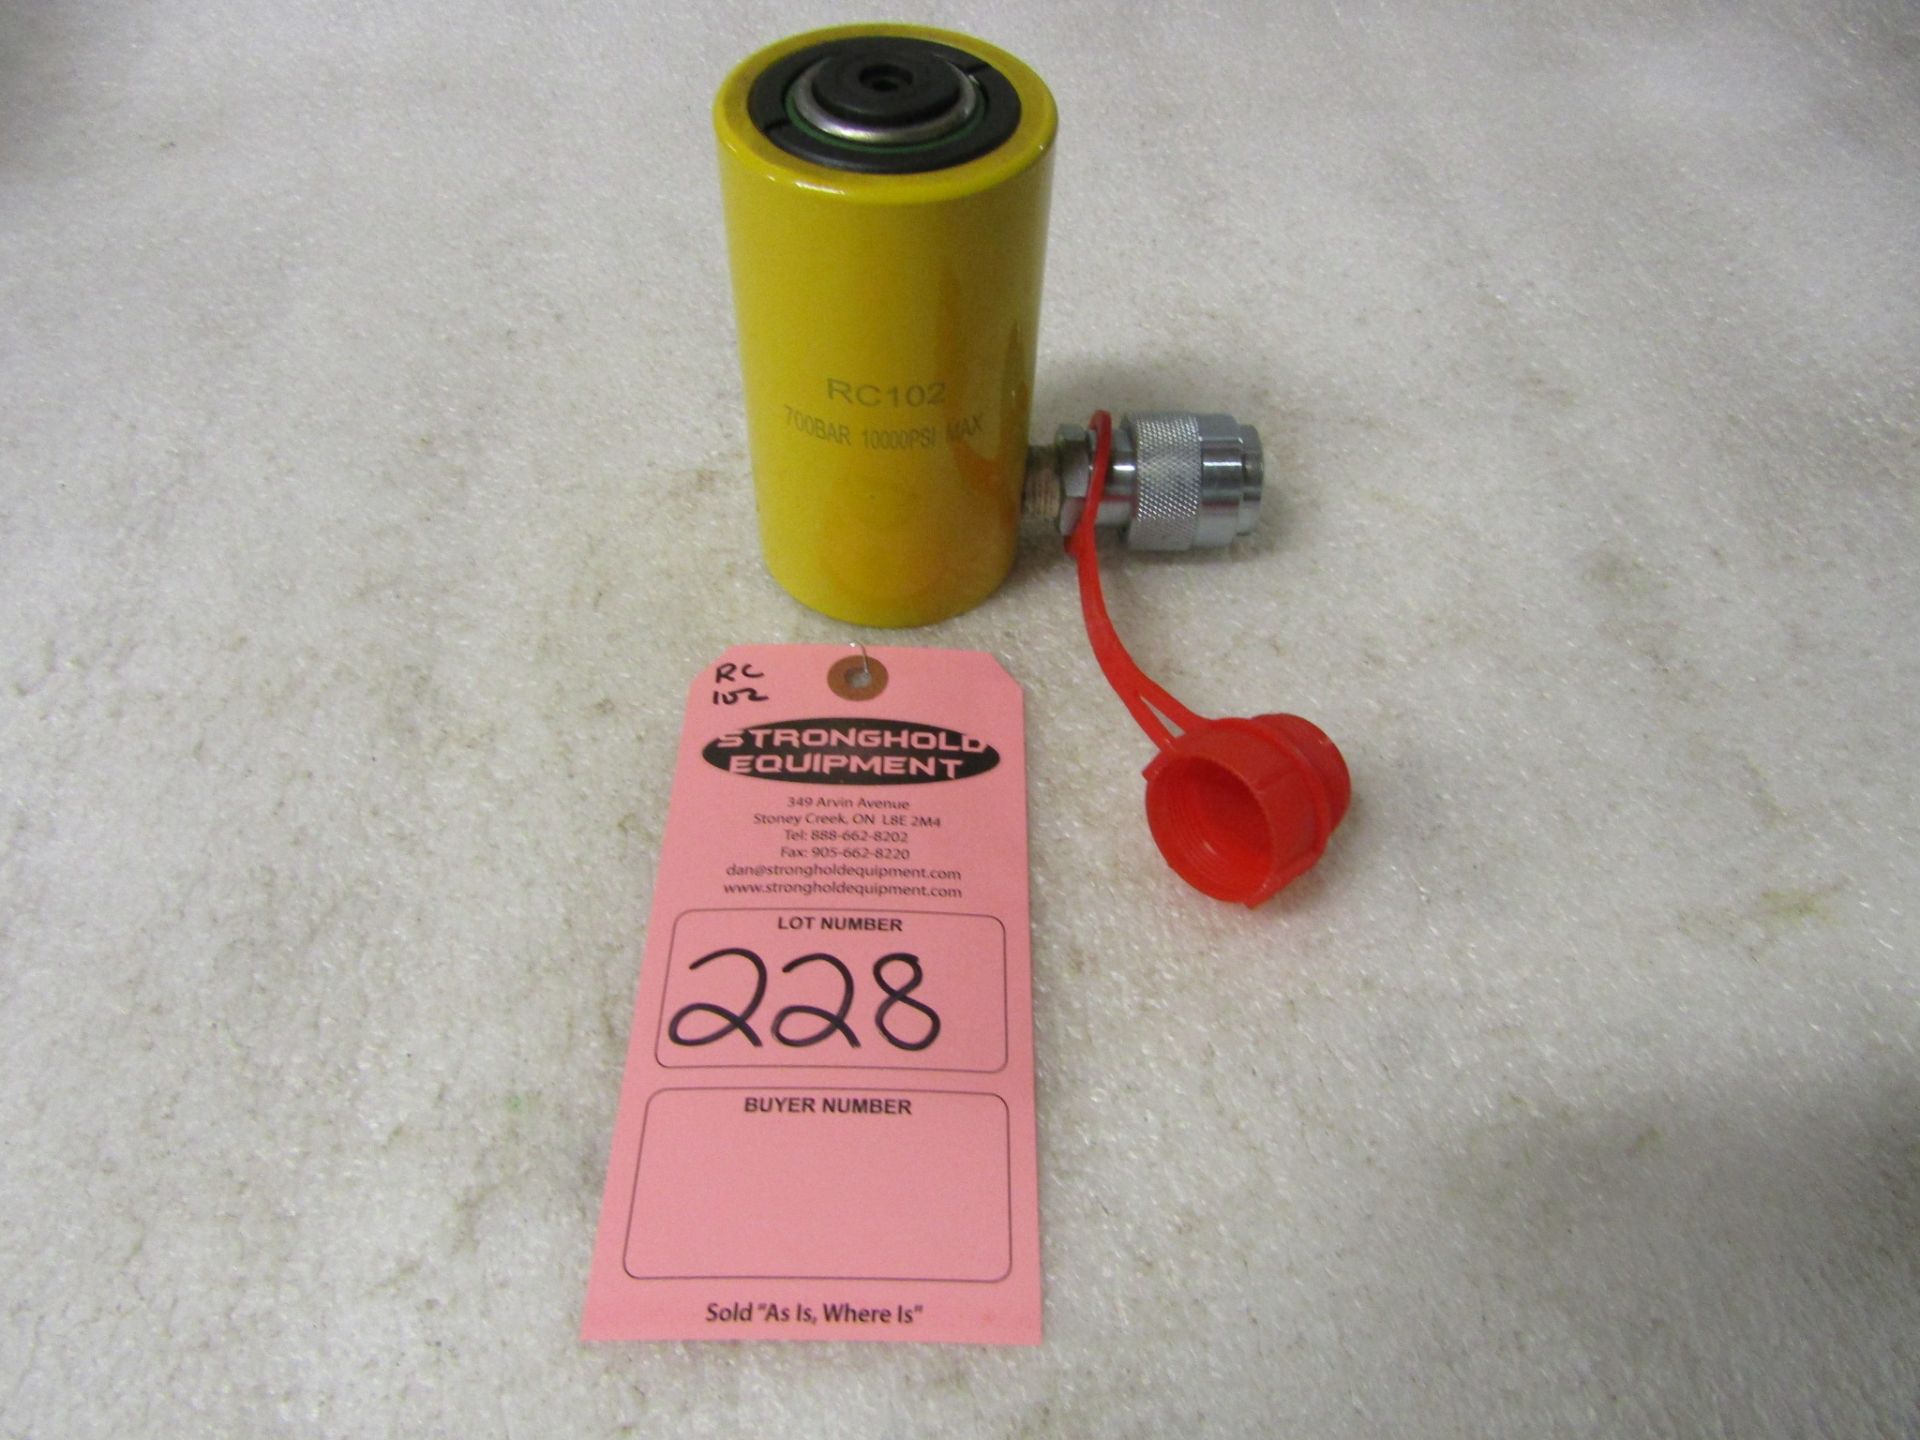 RC-102 MINT - 10 ton Hydraulic Jack with 2" stroke type cylinder